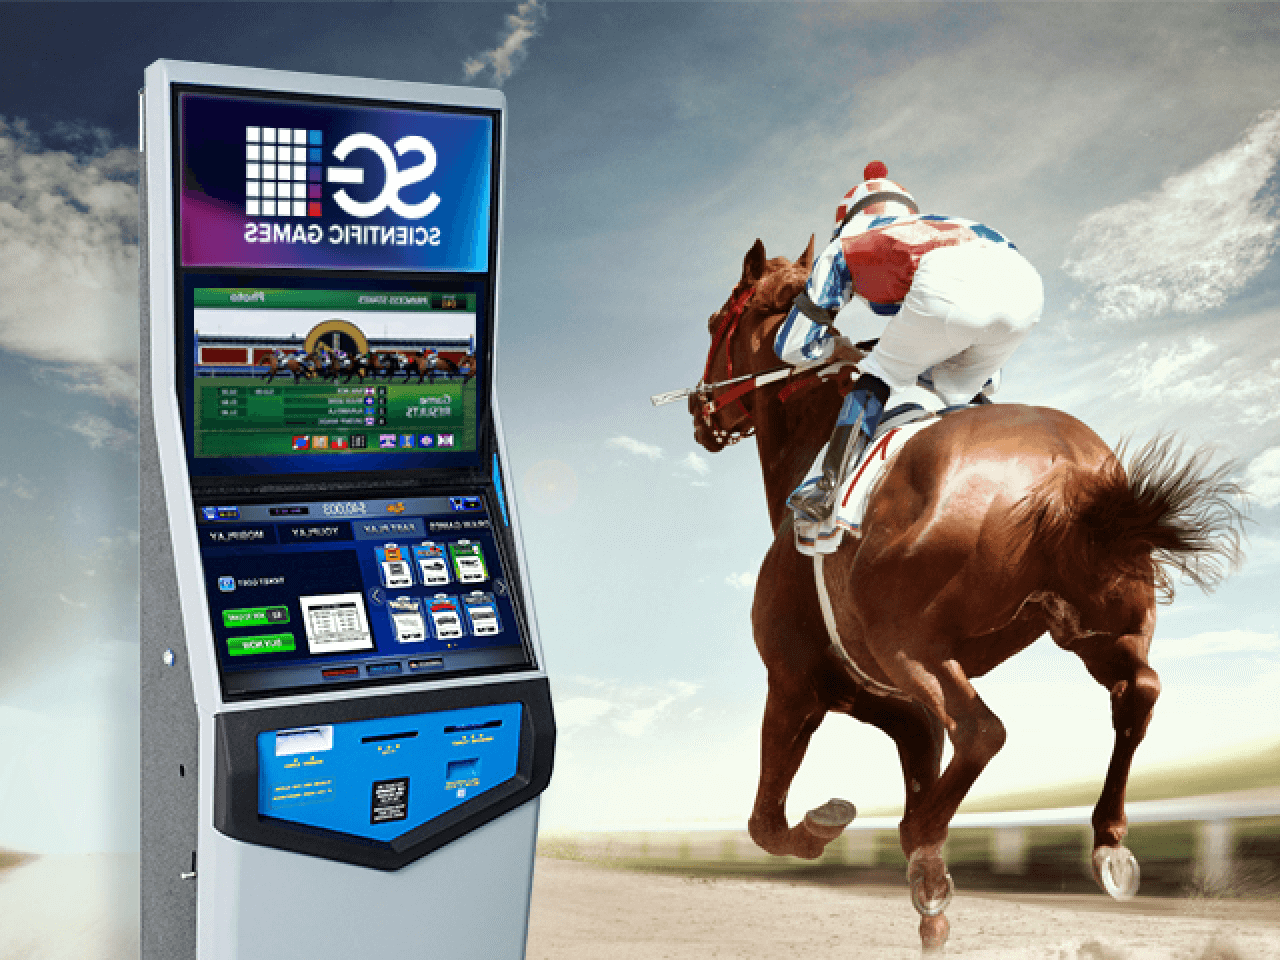  Sports Betting Terminals